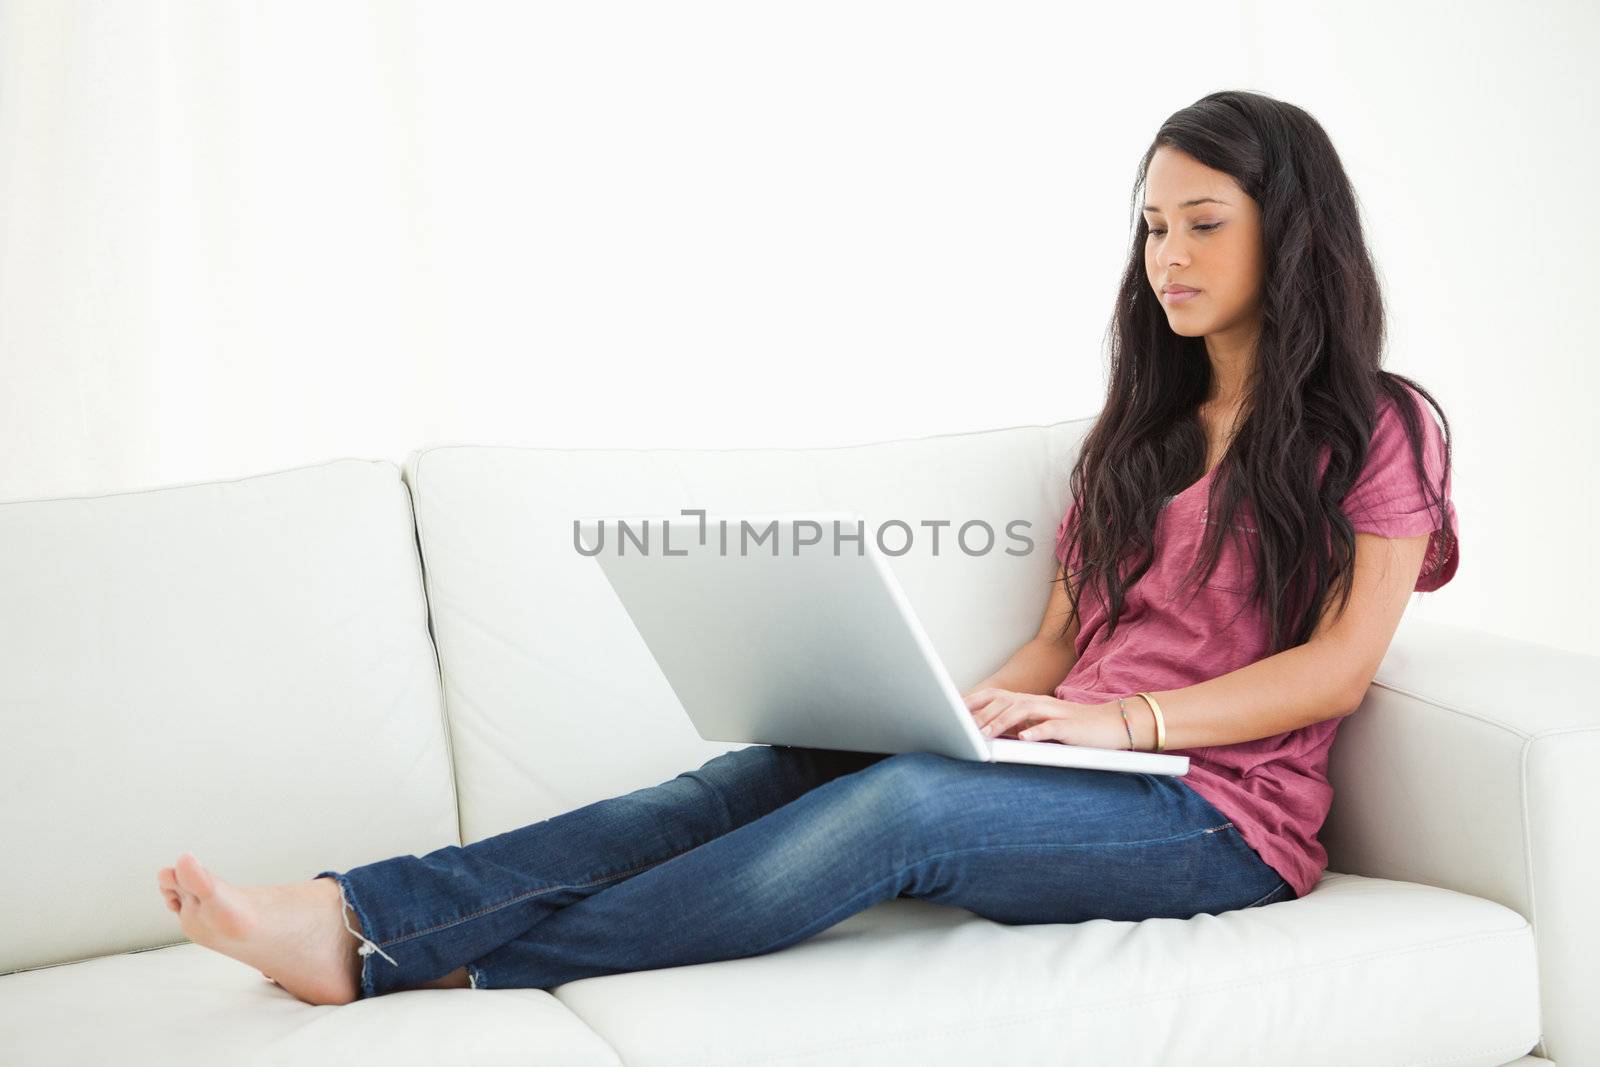 Unsmiling Latino student sitting on a sofa with her laptop